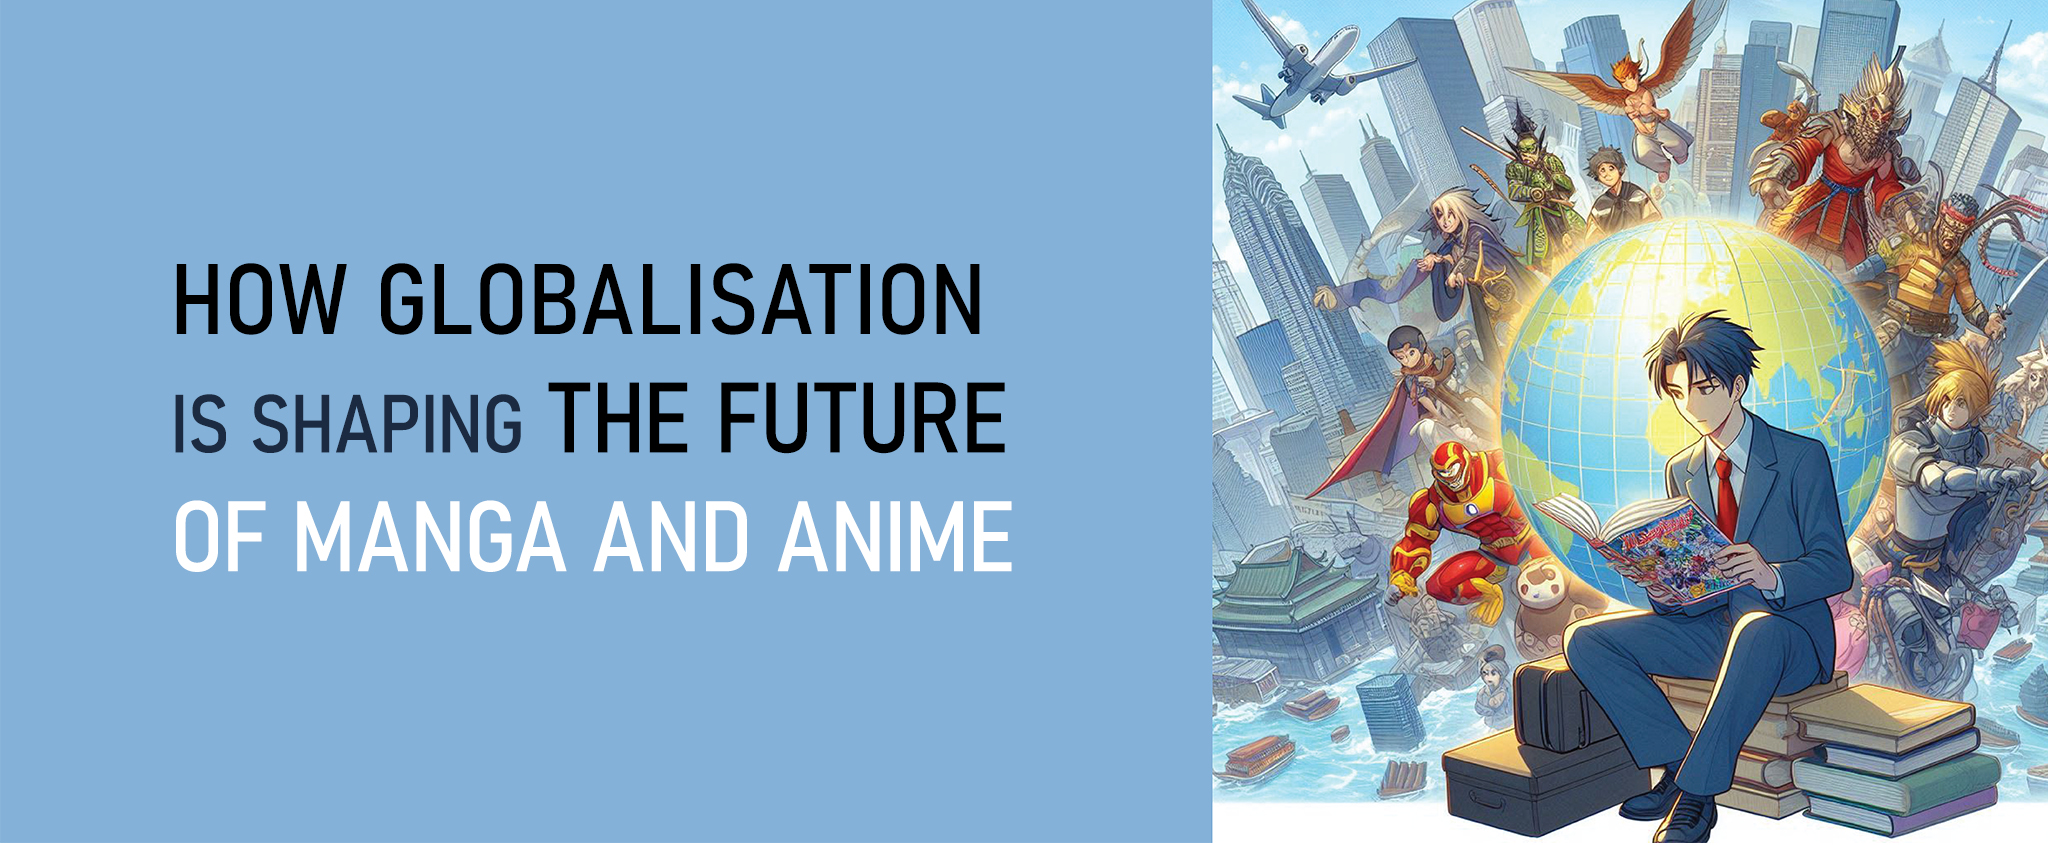 How Globalization is Shaping the Future of Manga and Anime